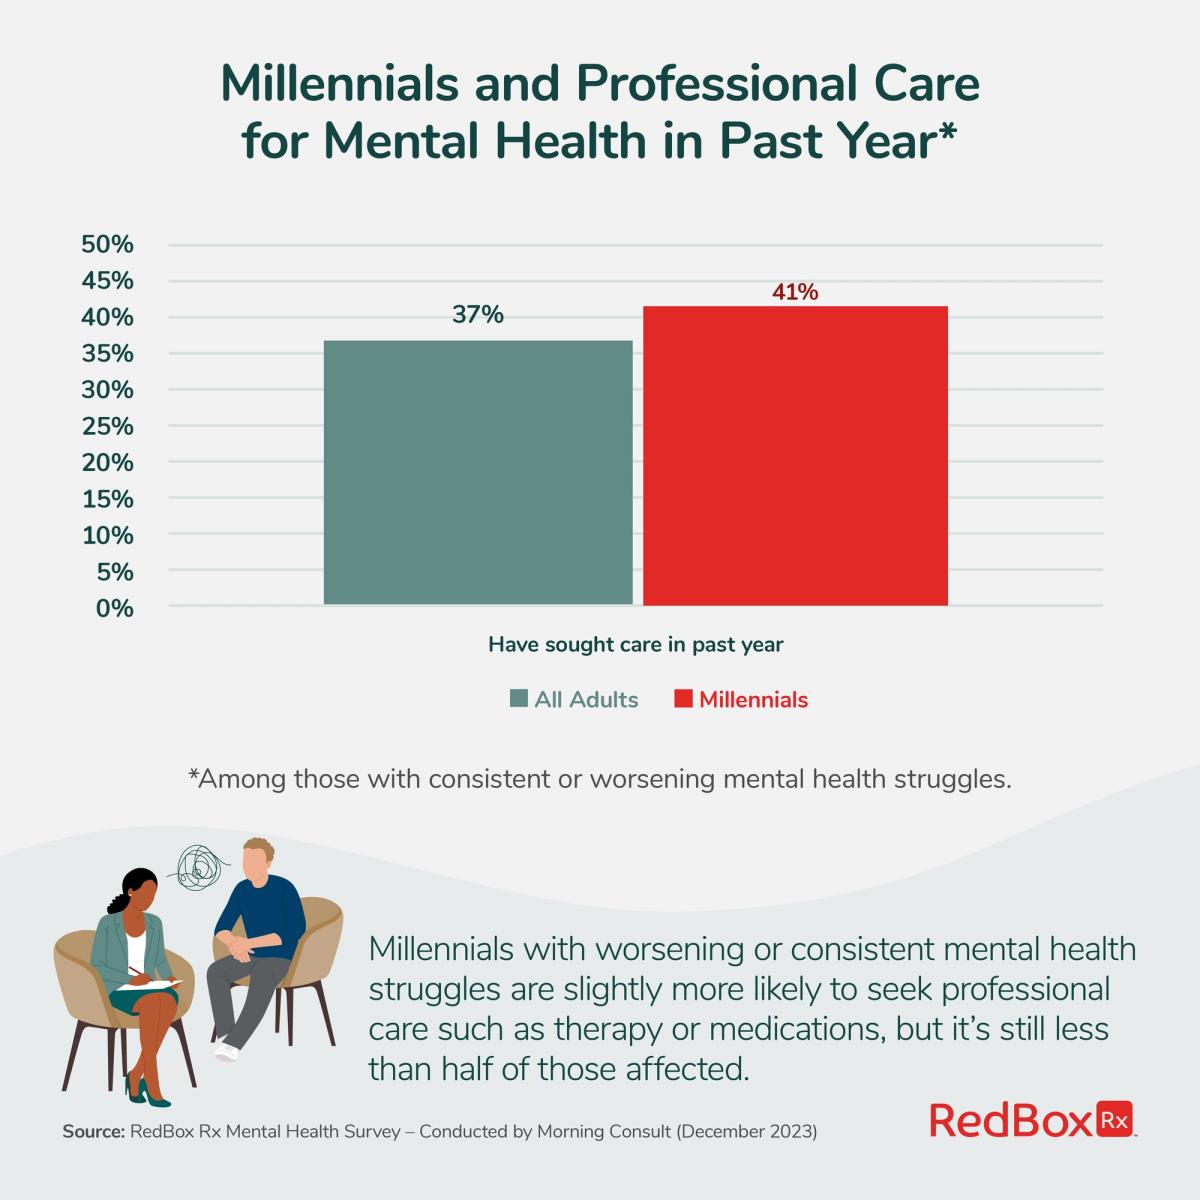 Millennials and Professional Care for Mental Health in the Past Year